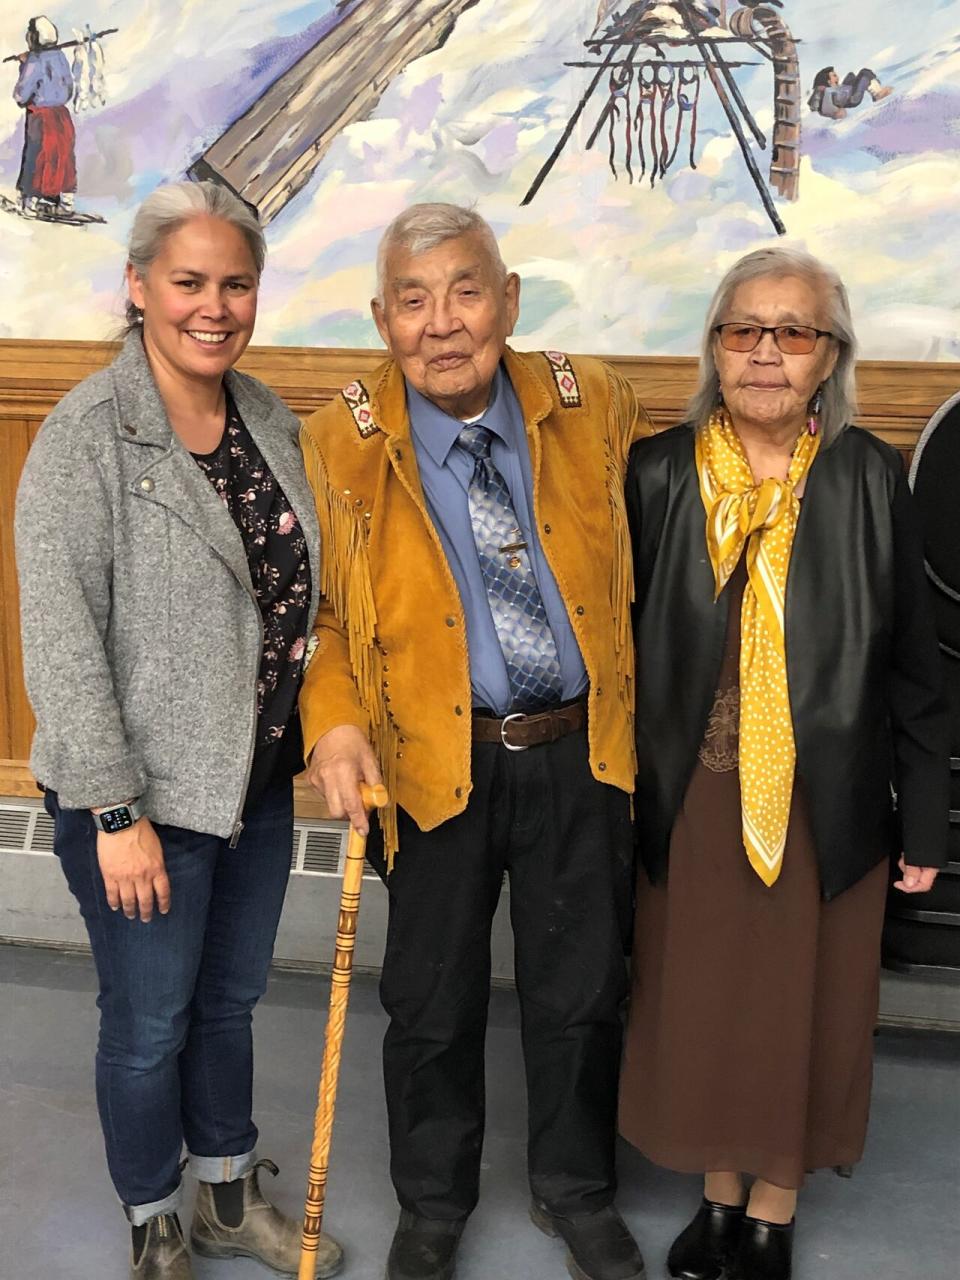 Georgette McLeod, the Tr'ondëk Hwëch'in First Nation's language administrator and oral historian appears with Percy Henry and his wife of 64 years, Mabel.